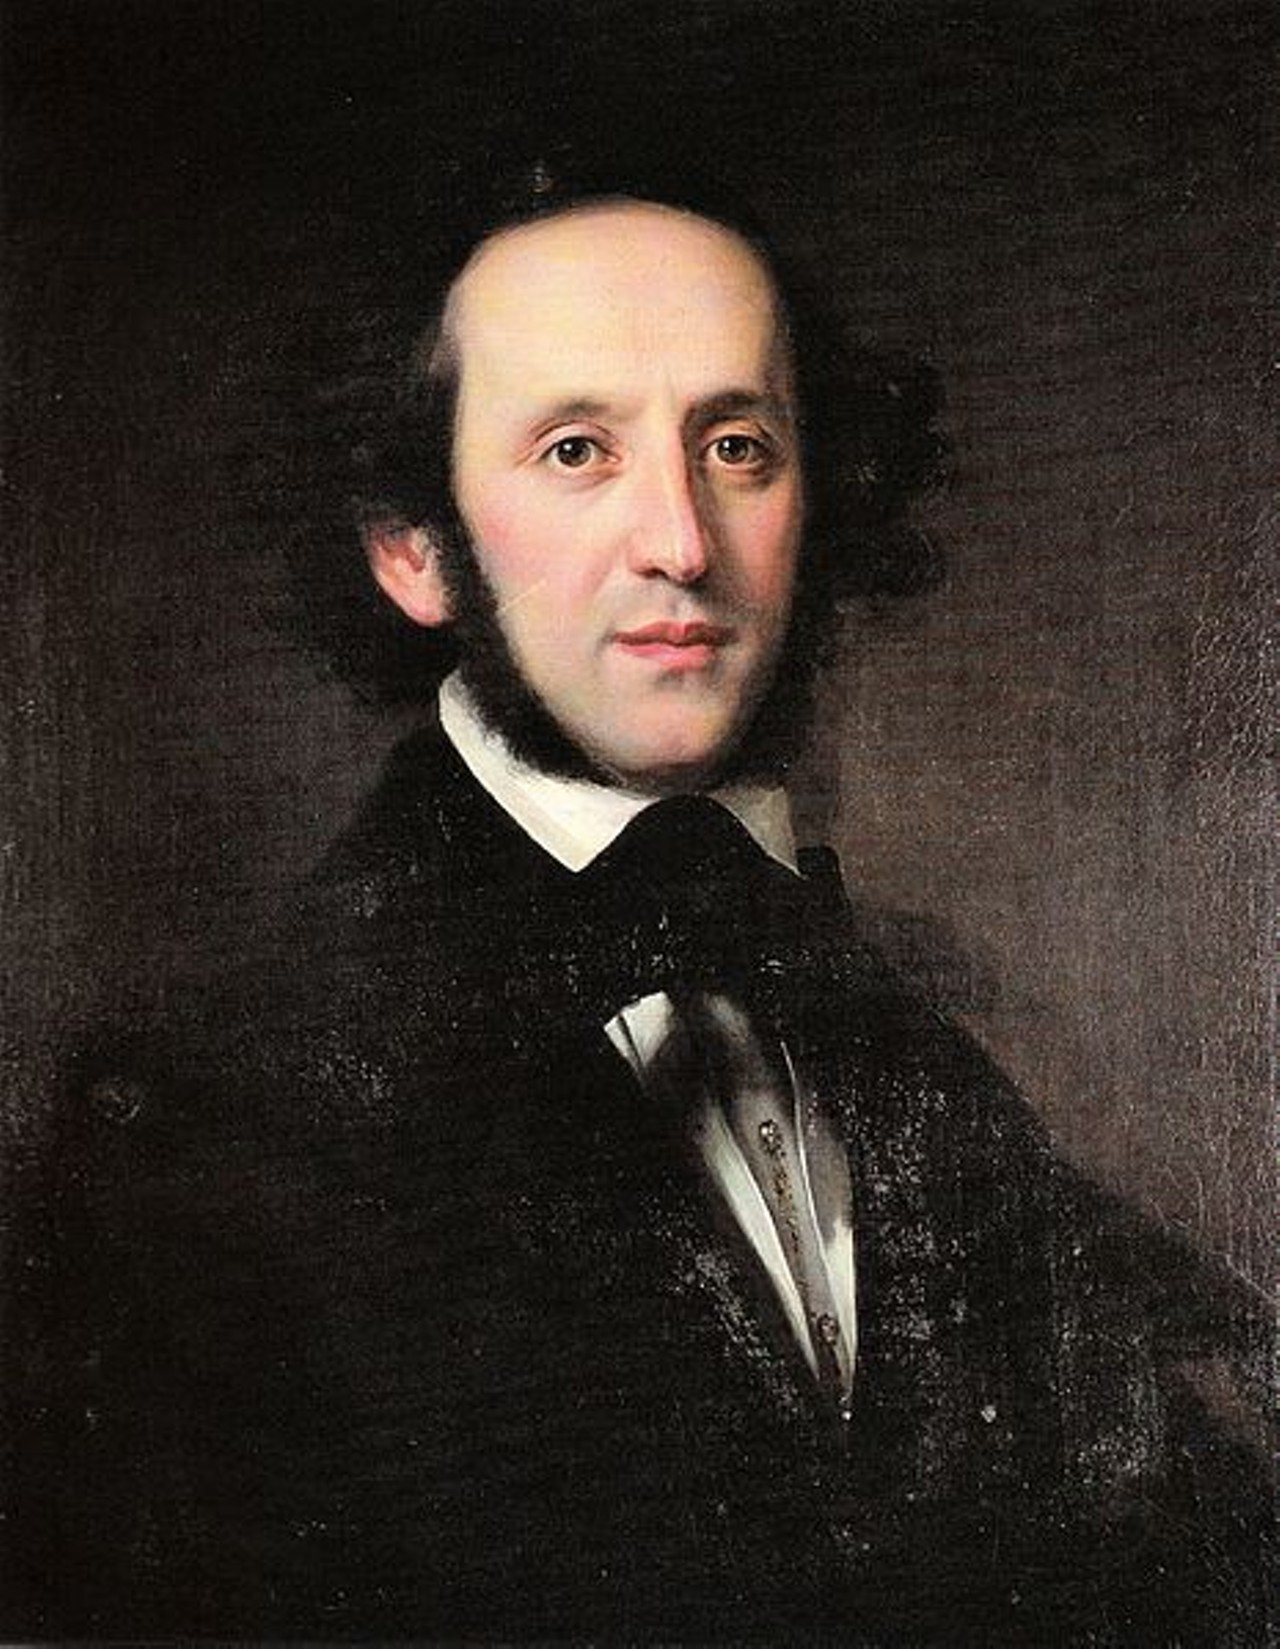  Mendelssohn&#146;s Second Symphony with the Cleveland Orchestra
Thu, March 5-Sun, March 8
Photo via Wikimedia Commons